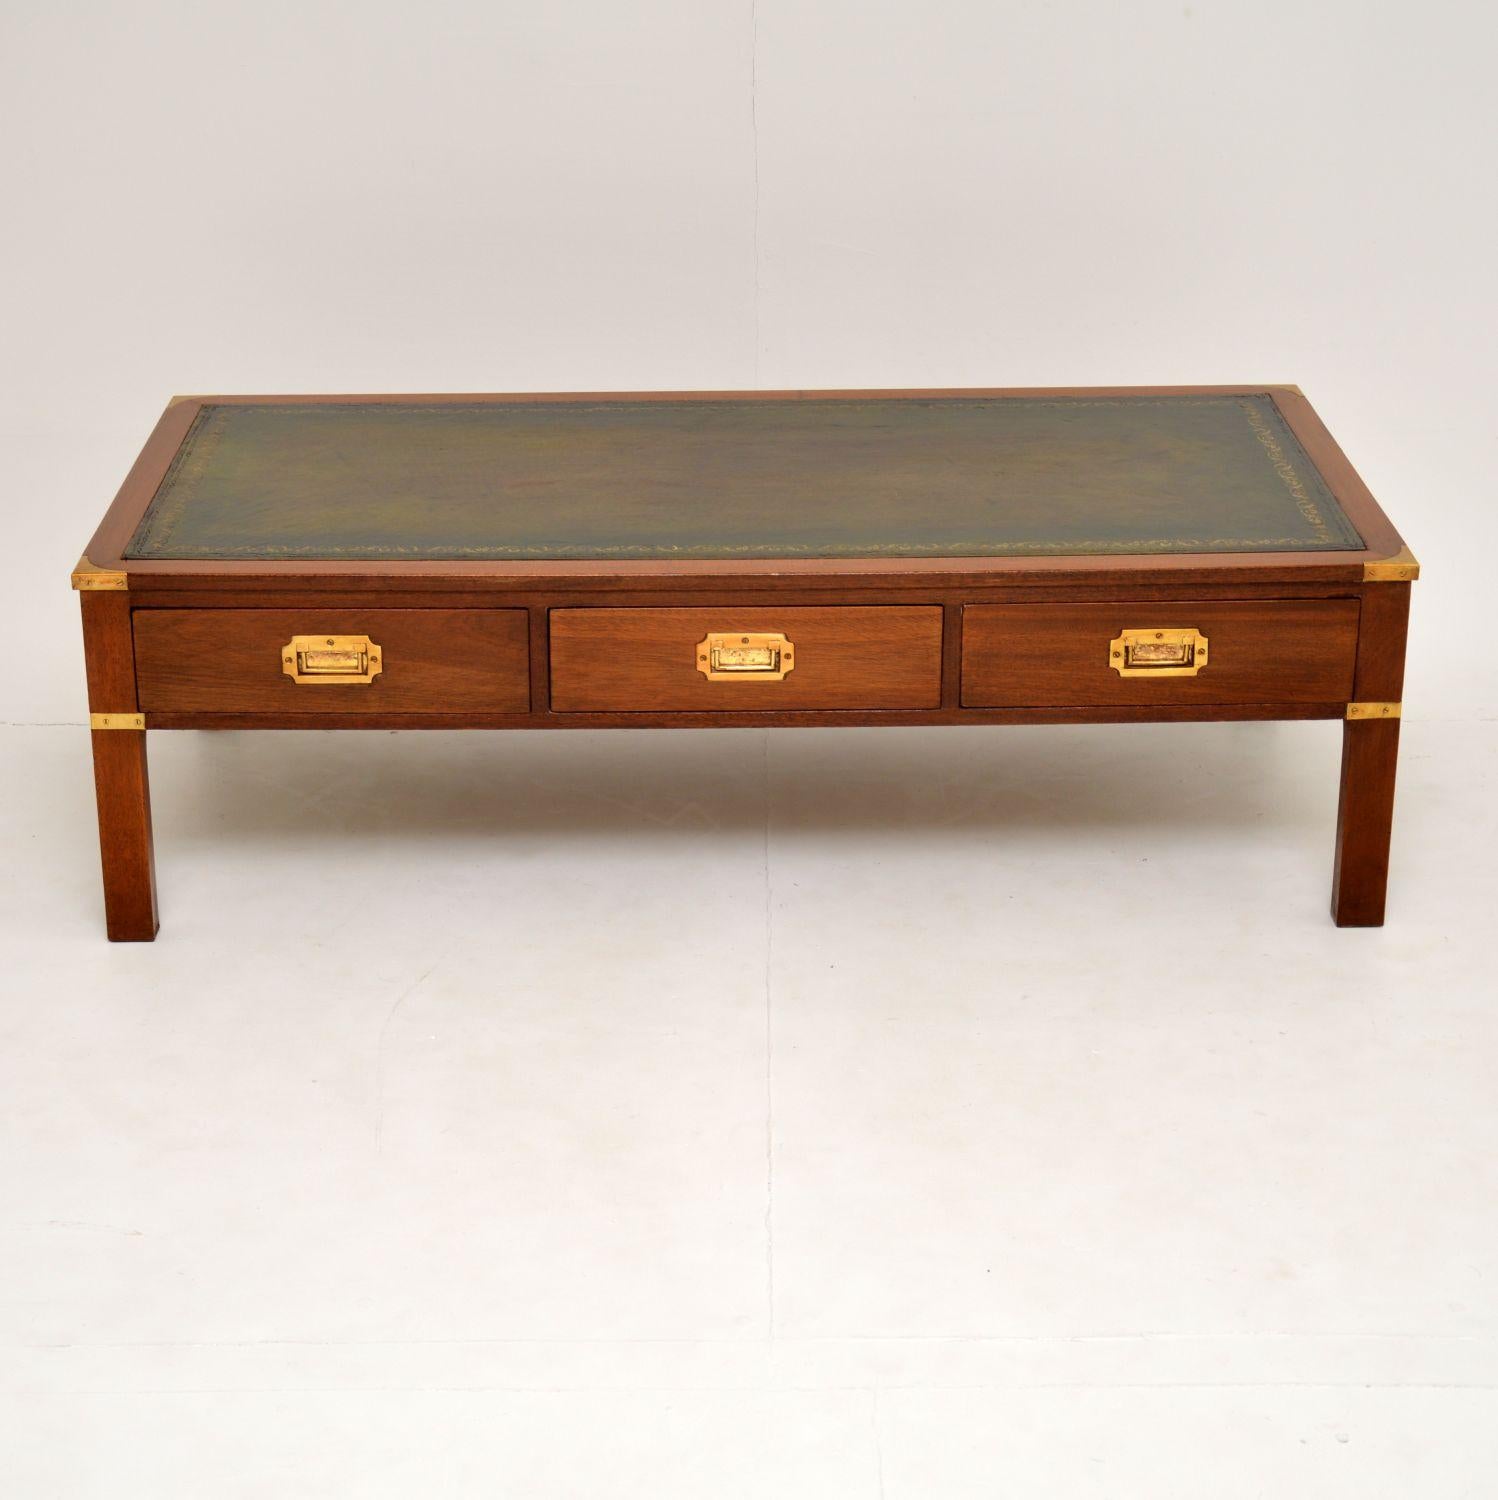 A smart and extremely well made coffee table in the antique military Campaign style. This is of great quality, its made from mahogany, with a leather top, brass corner fittings, a tooled leather top and three drawers with inset brass military